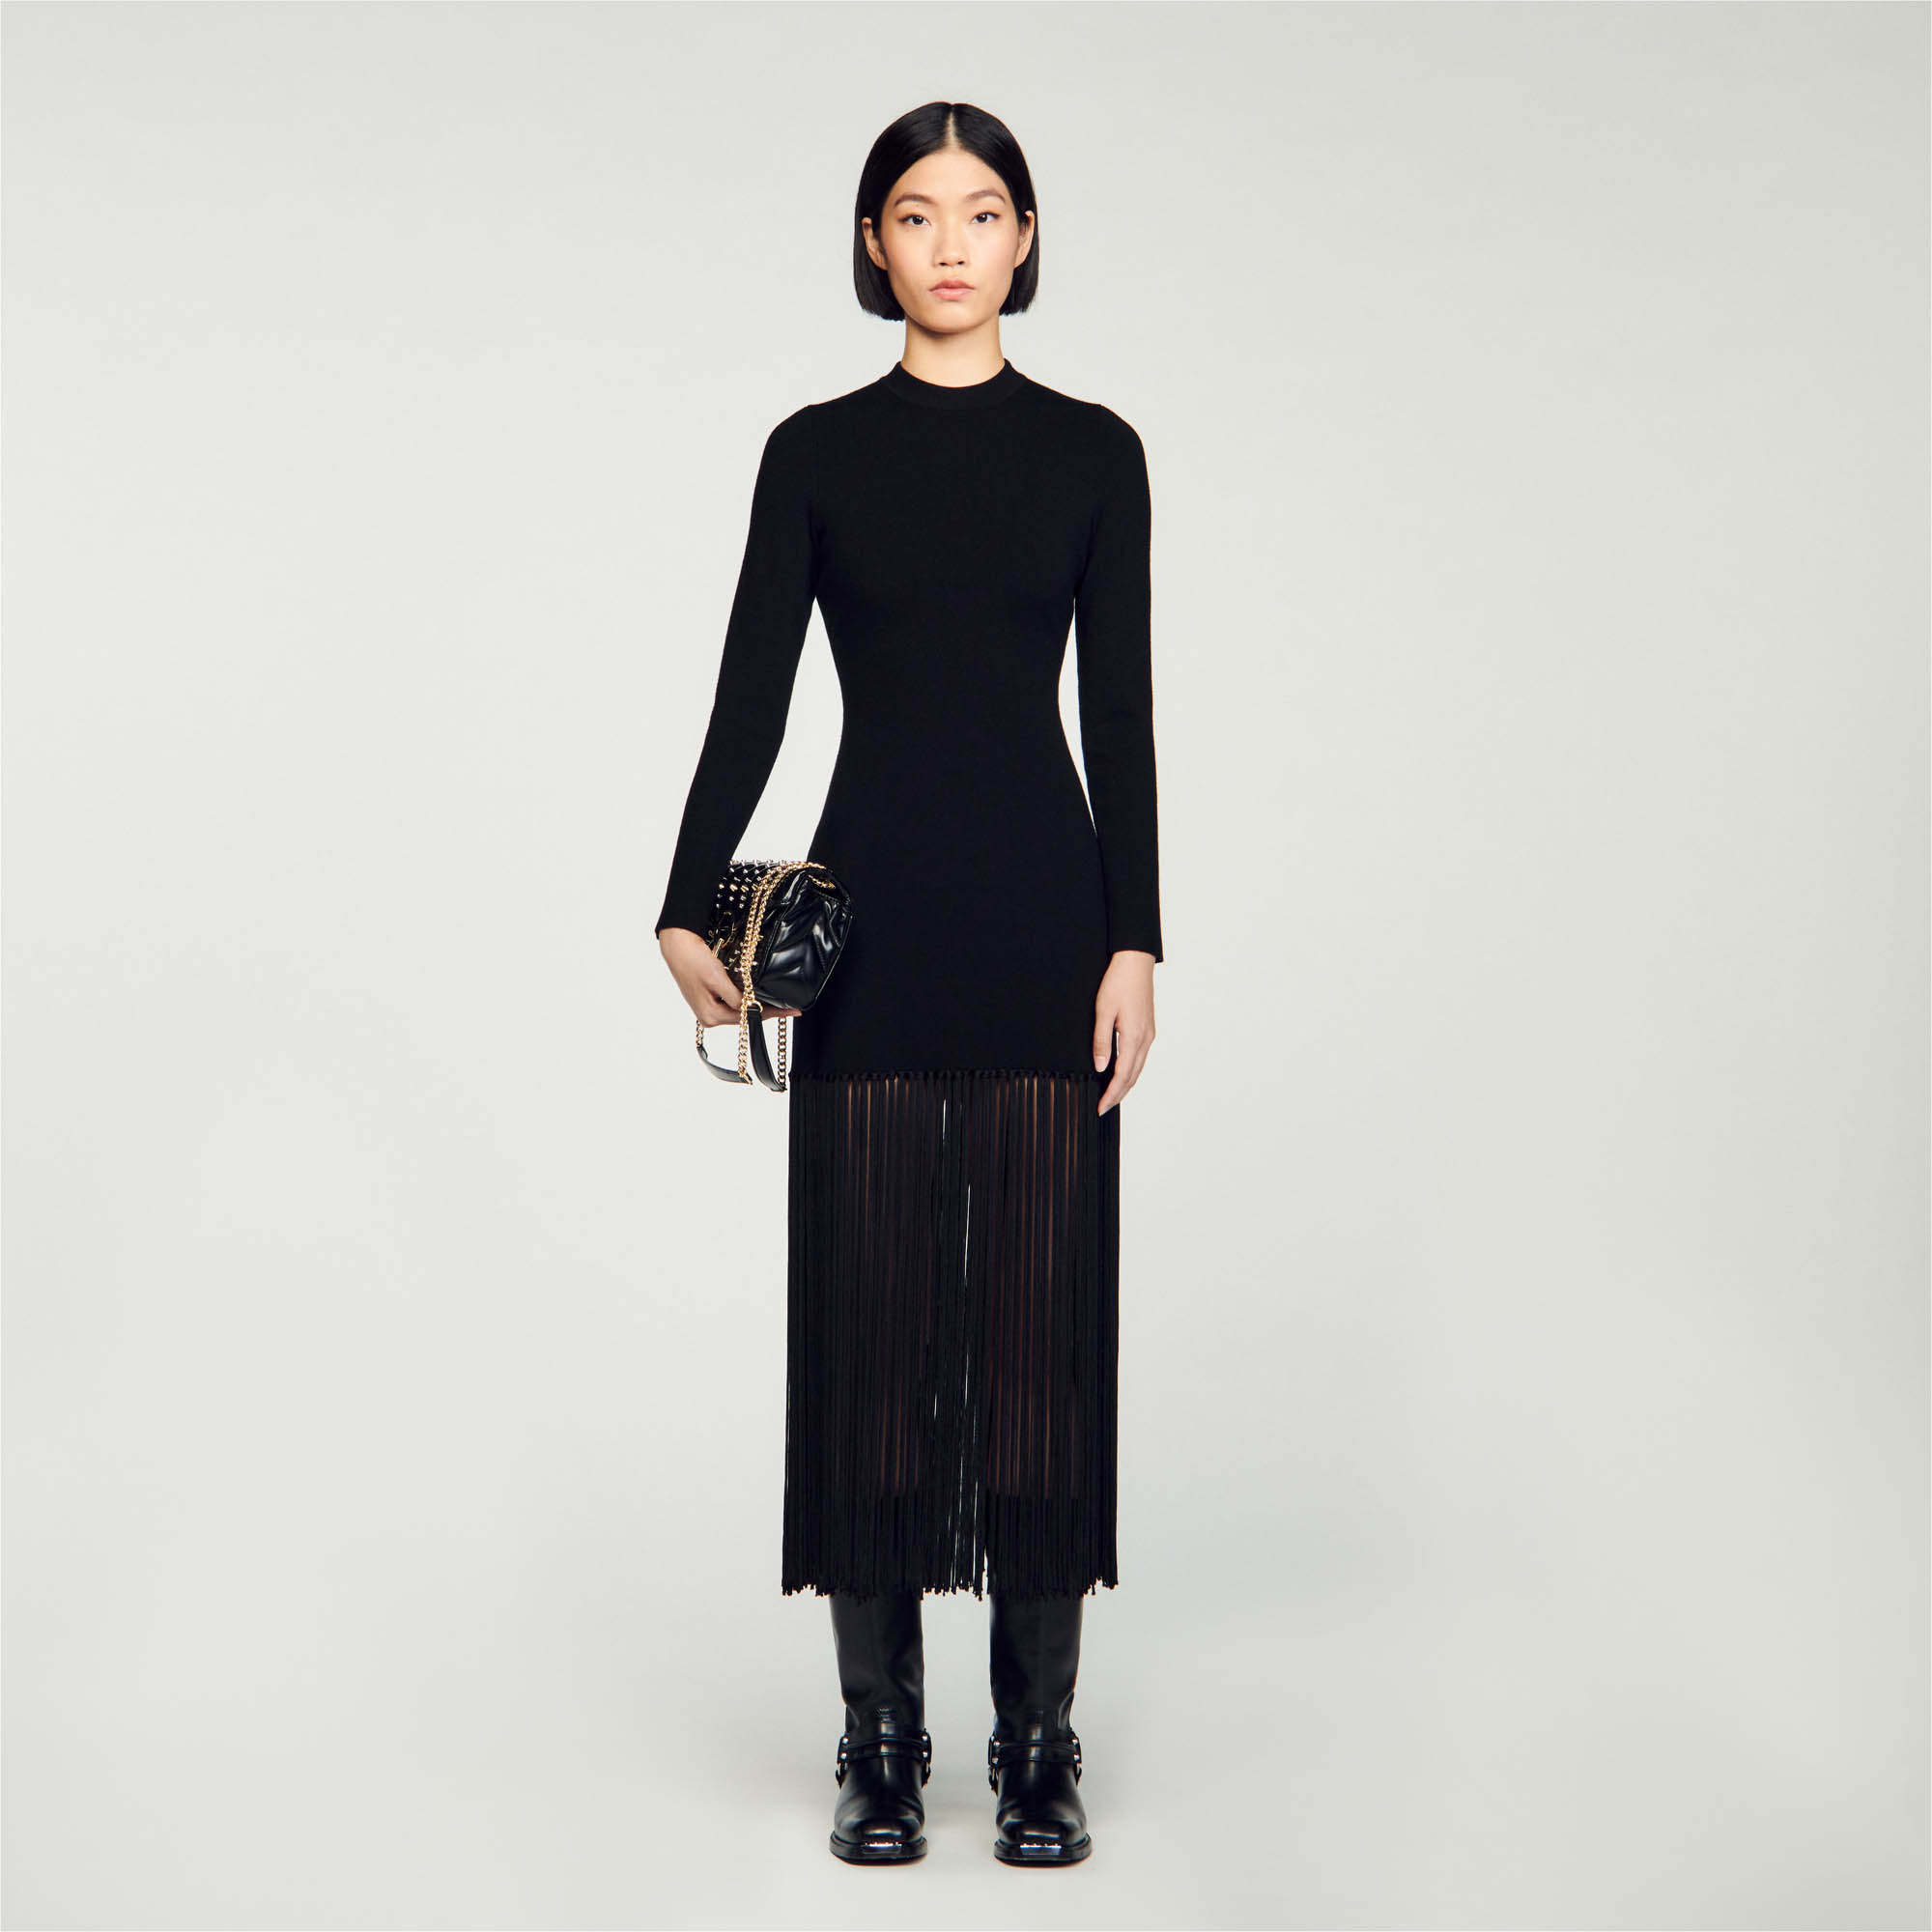 Sandro polyamide Knitted maxi dress with round neck and long sleeves, embellished with fringes at the bottom